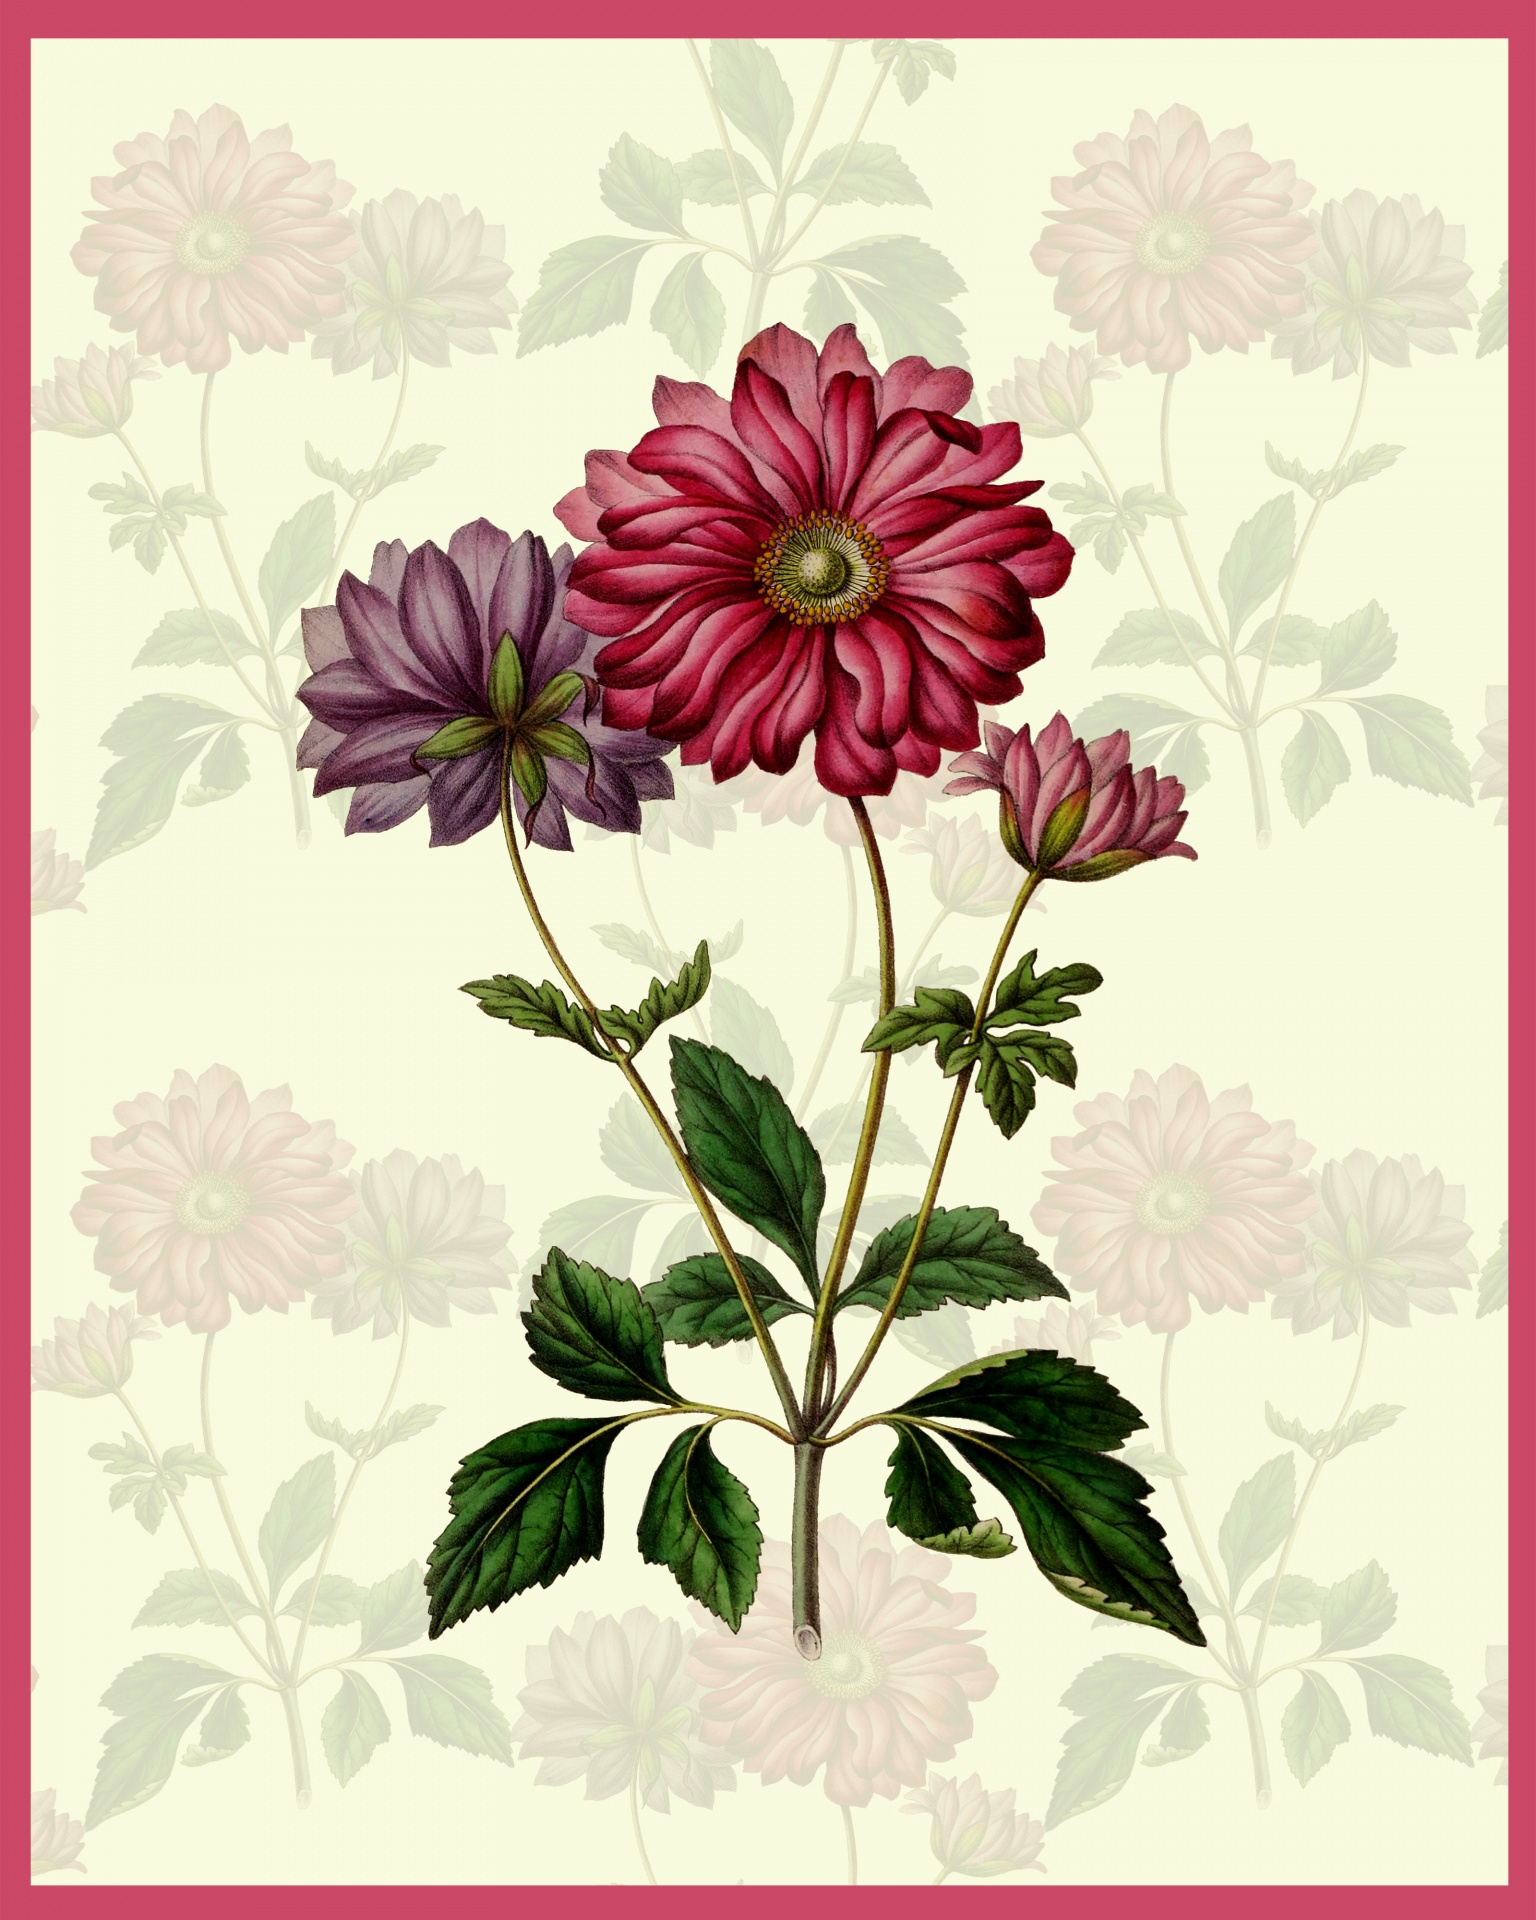 Beautiful botanical vintage illustration of Anemone Japonica flowers on floral faded background card or print template